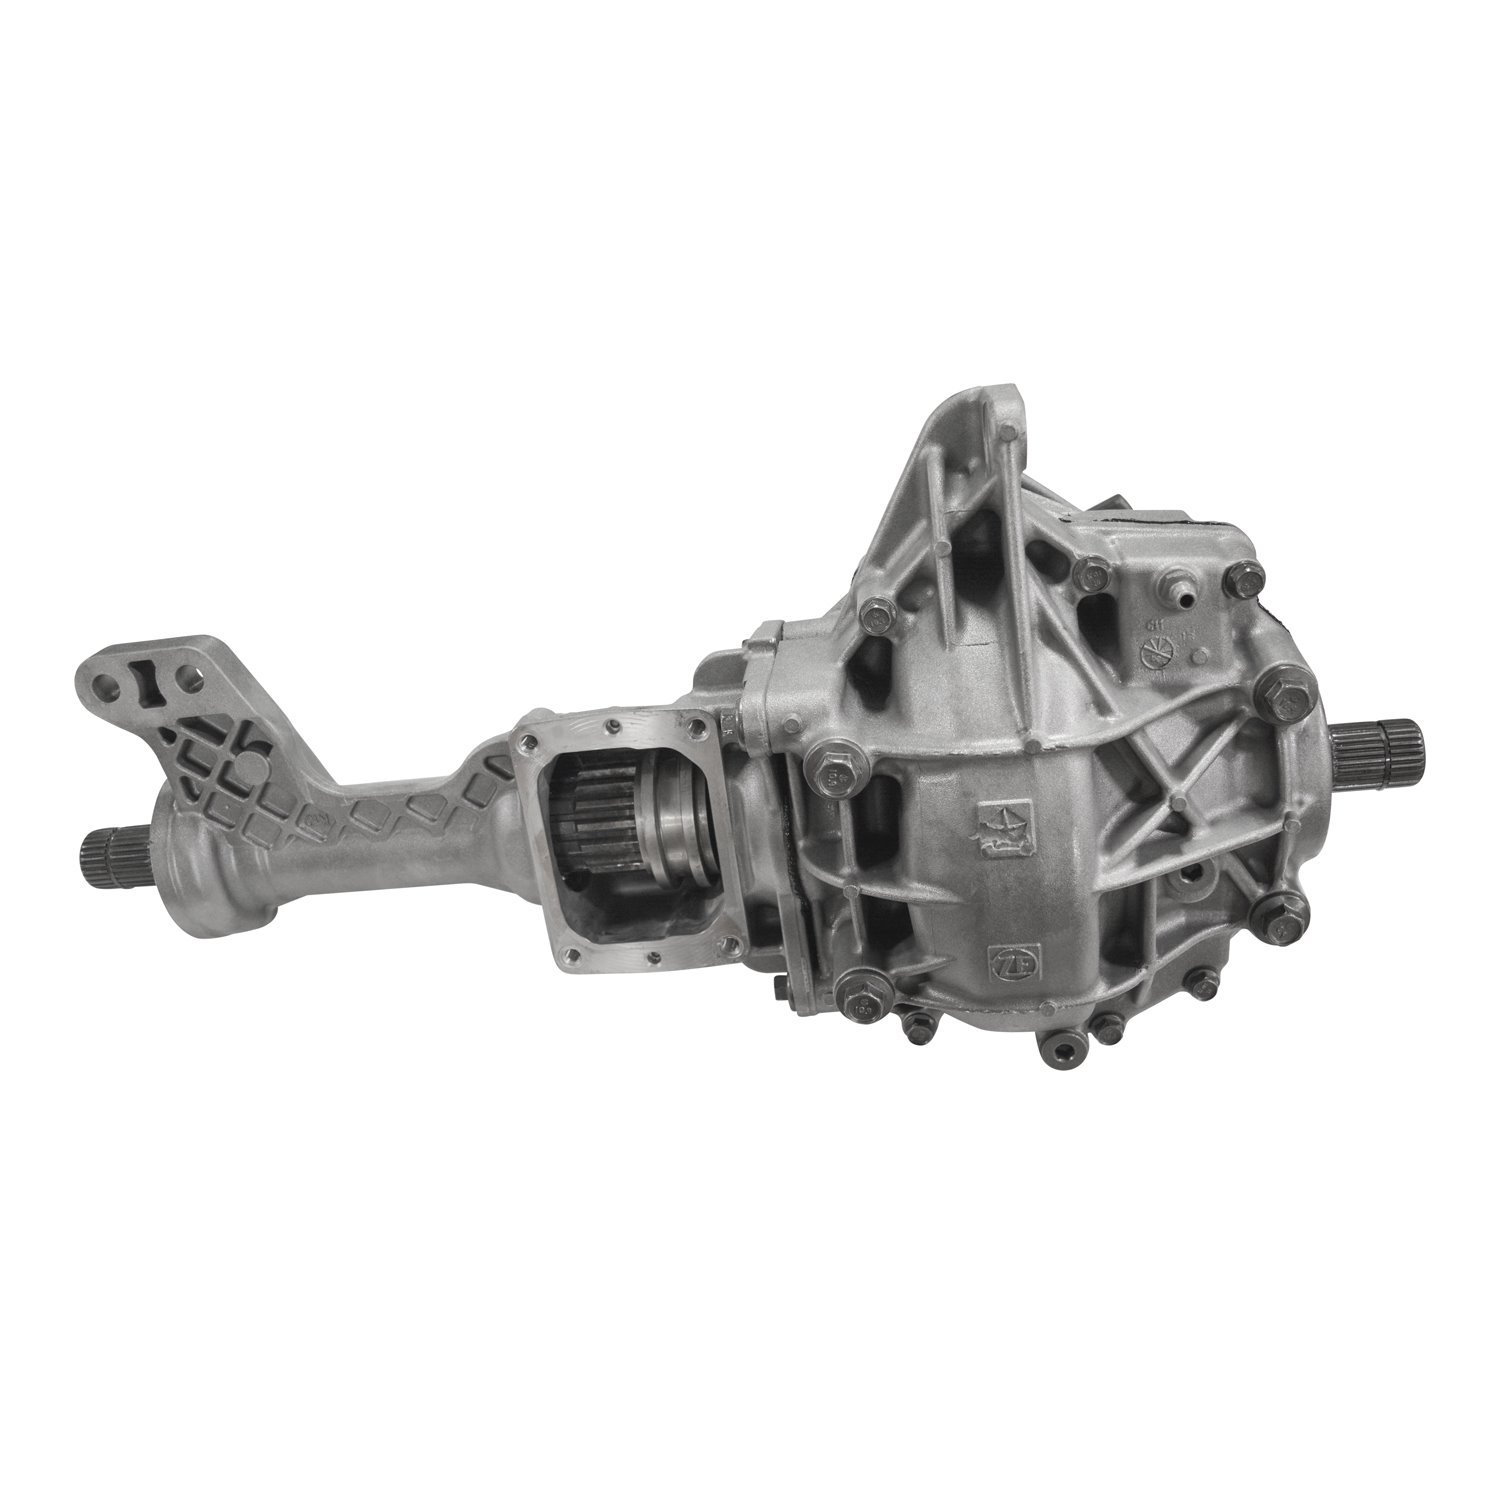 Remanufactured Front Axle Assy, C215F, 8.46" Ring Gear, 2013-18 Ram 1500 3.21 Ratio